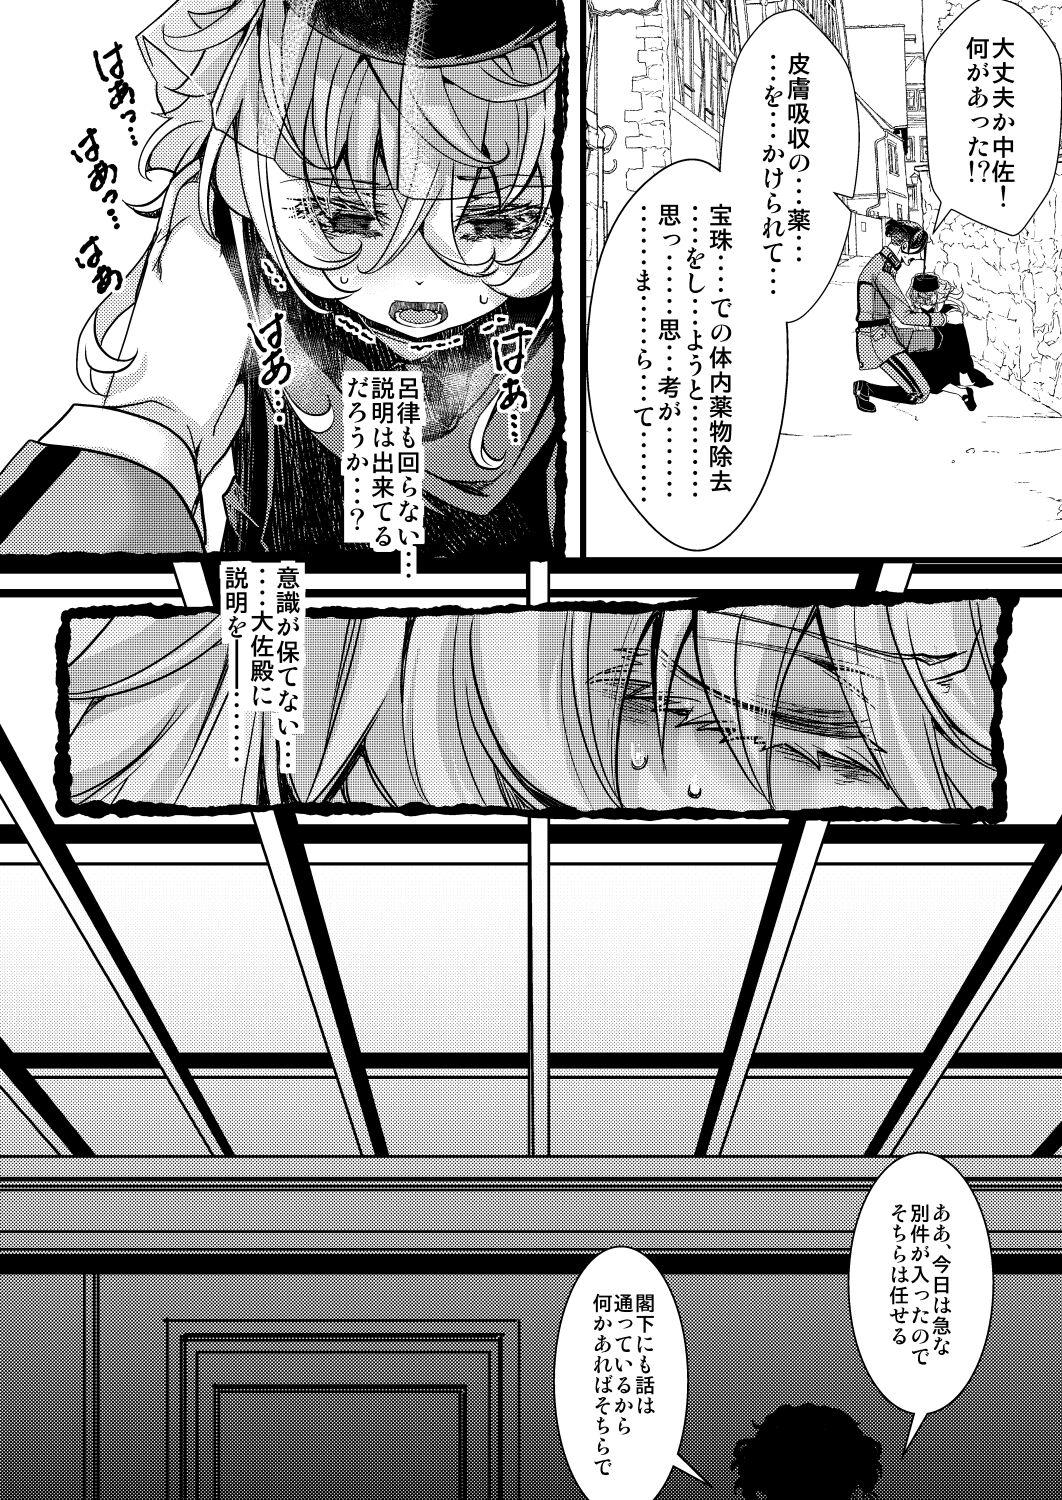 Wet Cunt Rugs - Youjo senki | saga of tanya the evil Gay Party - Page 8